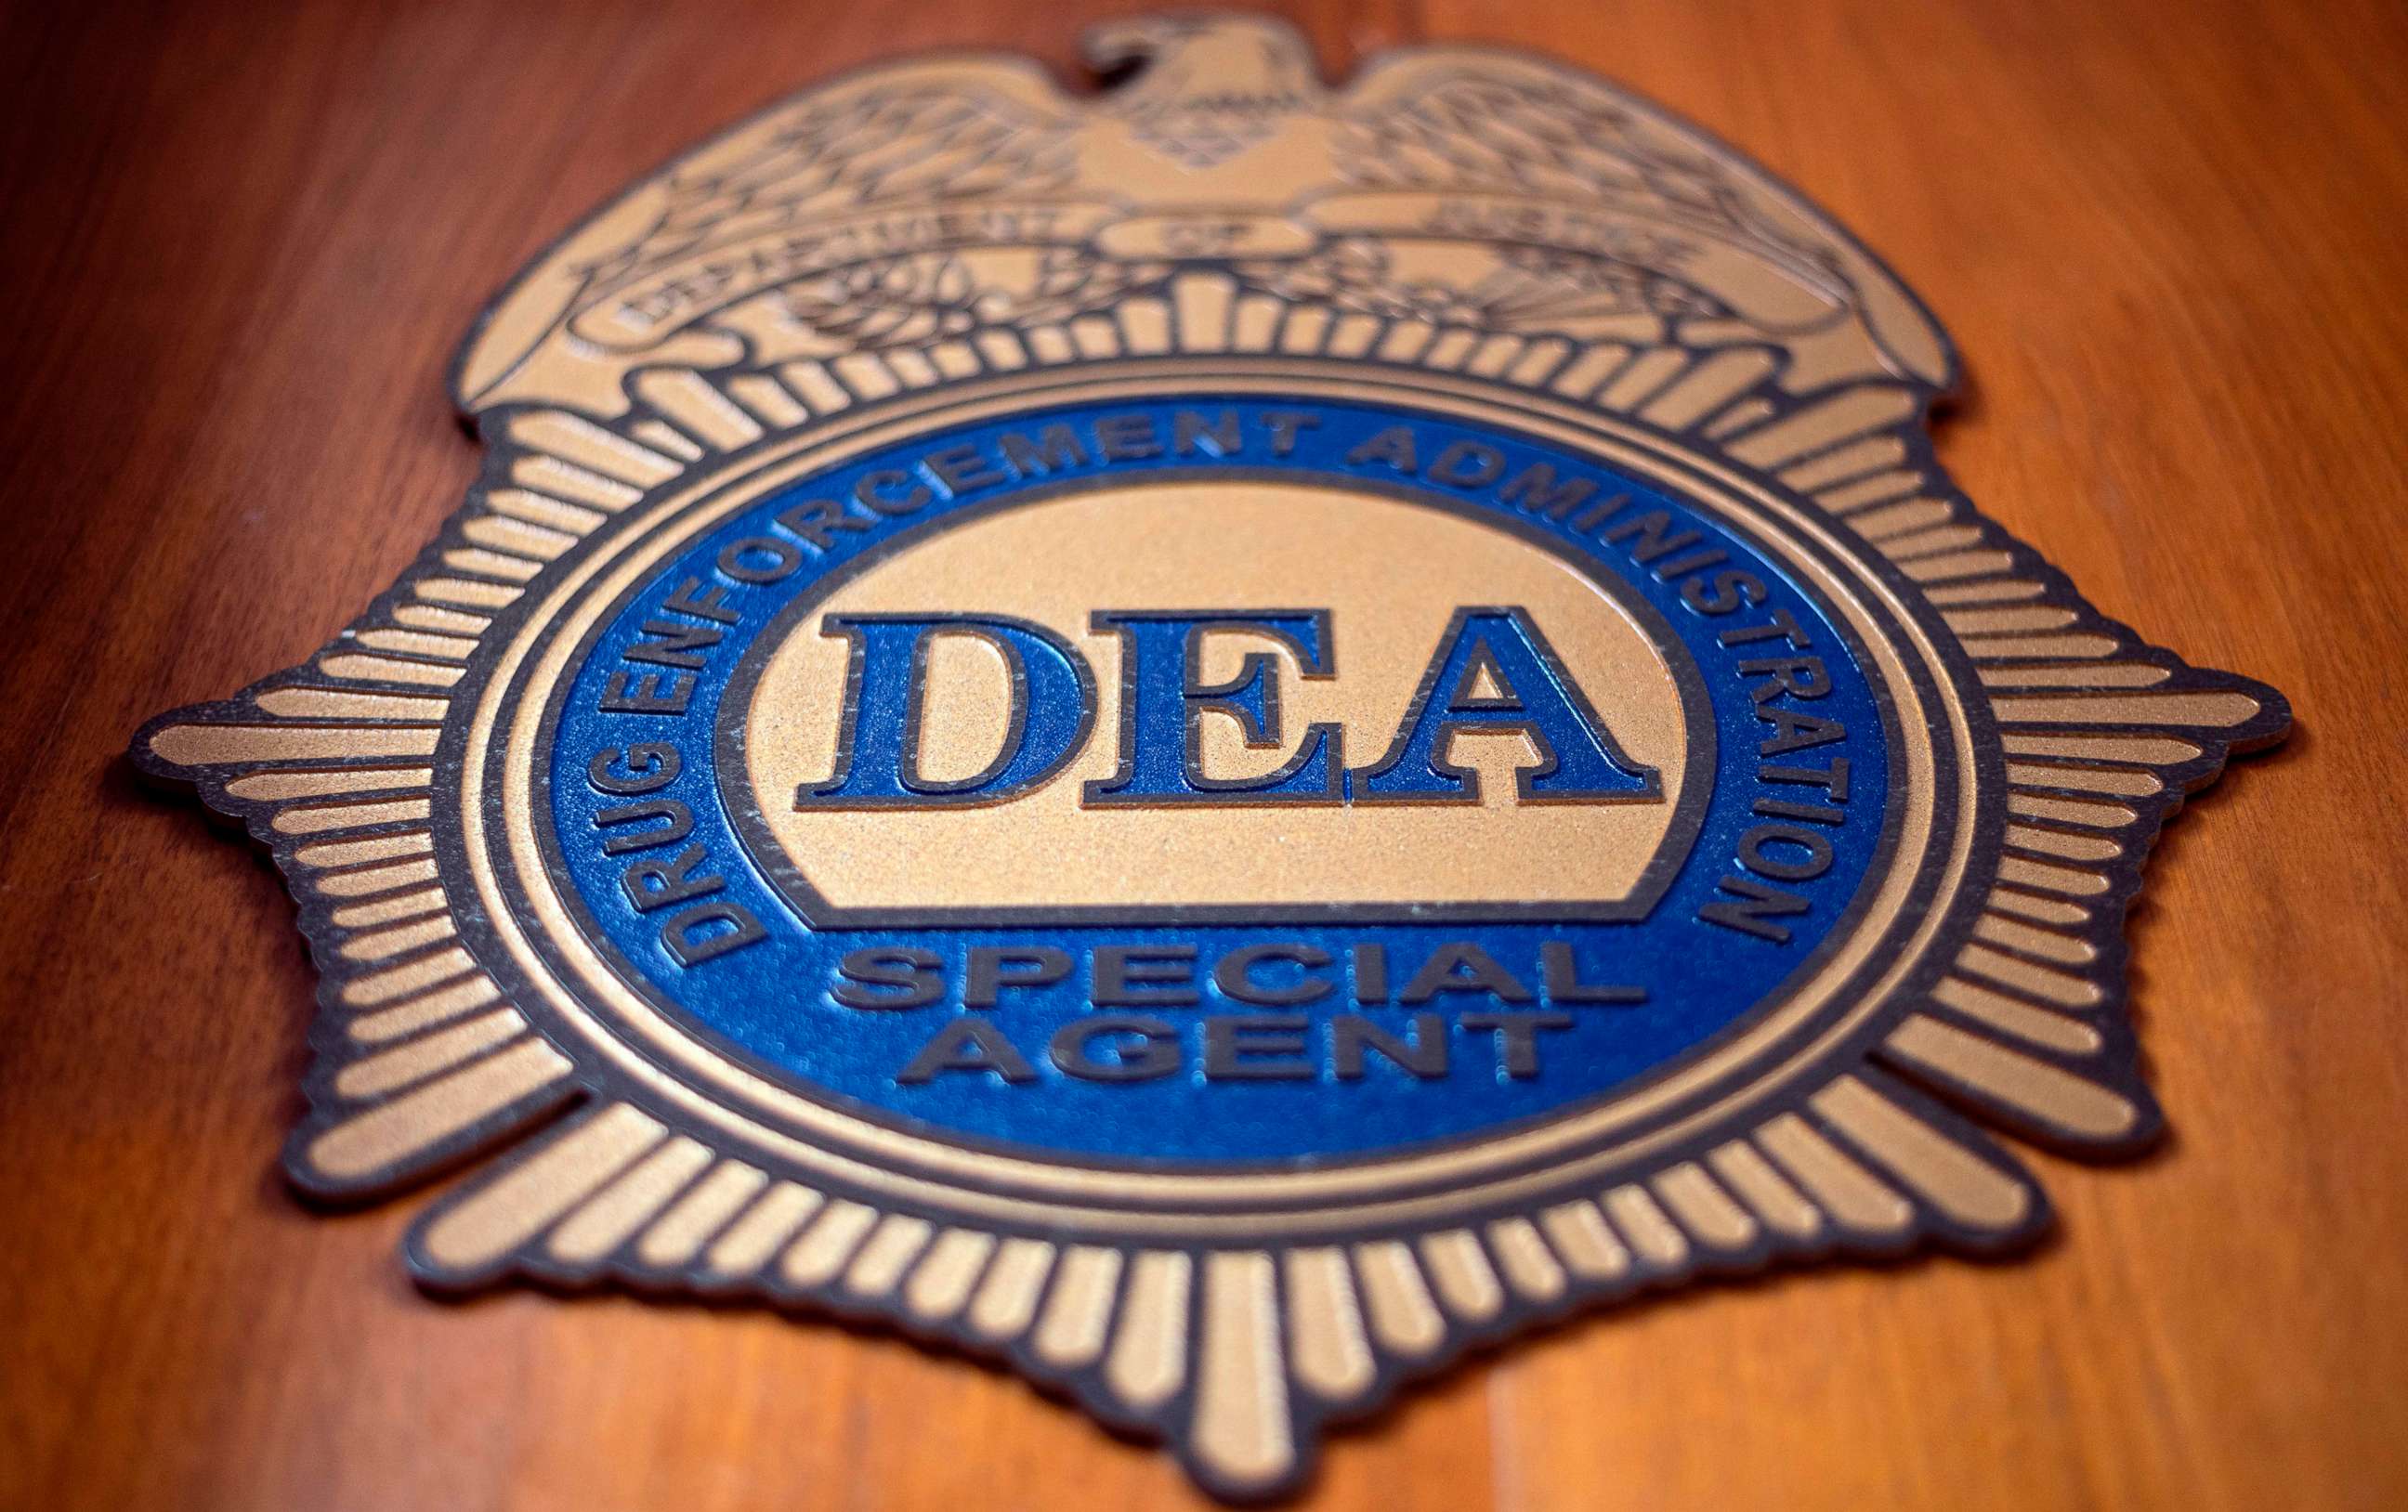 PHOTO: A logo reading DEA Special Agent is pictured in the Office of the US Drug Enforcement Administration (DEA), May 29, 2019, in New York.